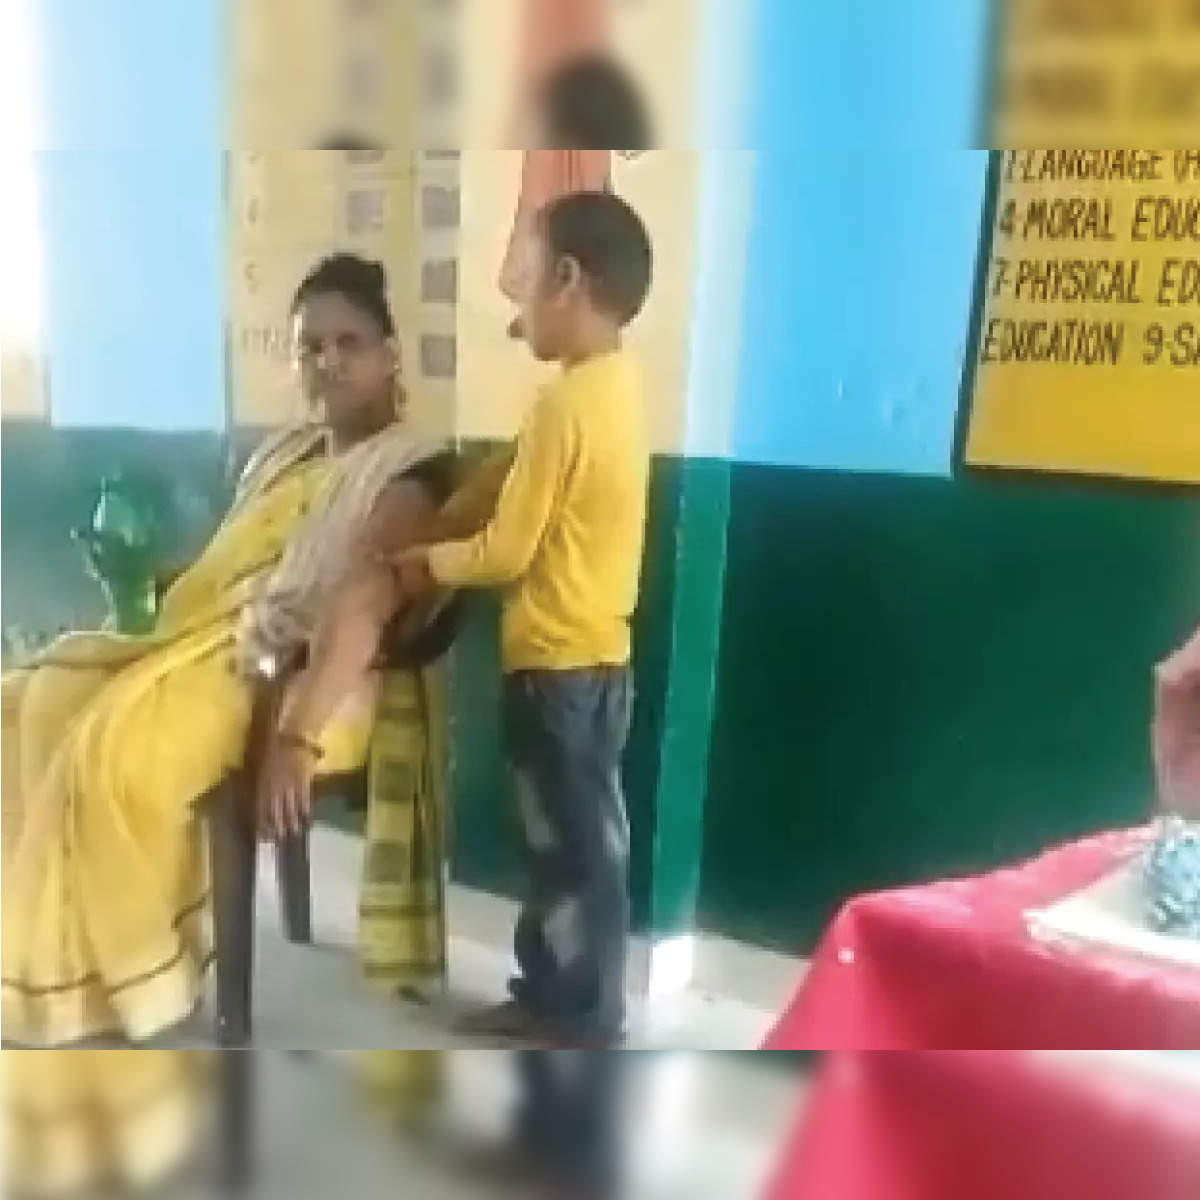 Teacher Massage: Teacher gets student to massage her arm, is suspended:  Viral video - The Economic Times